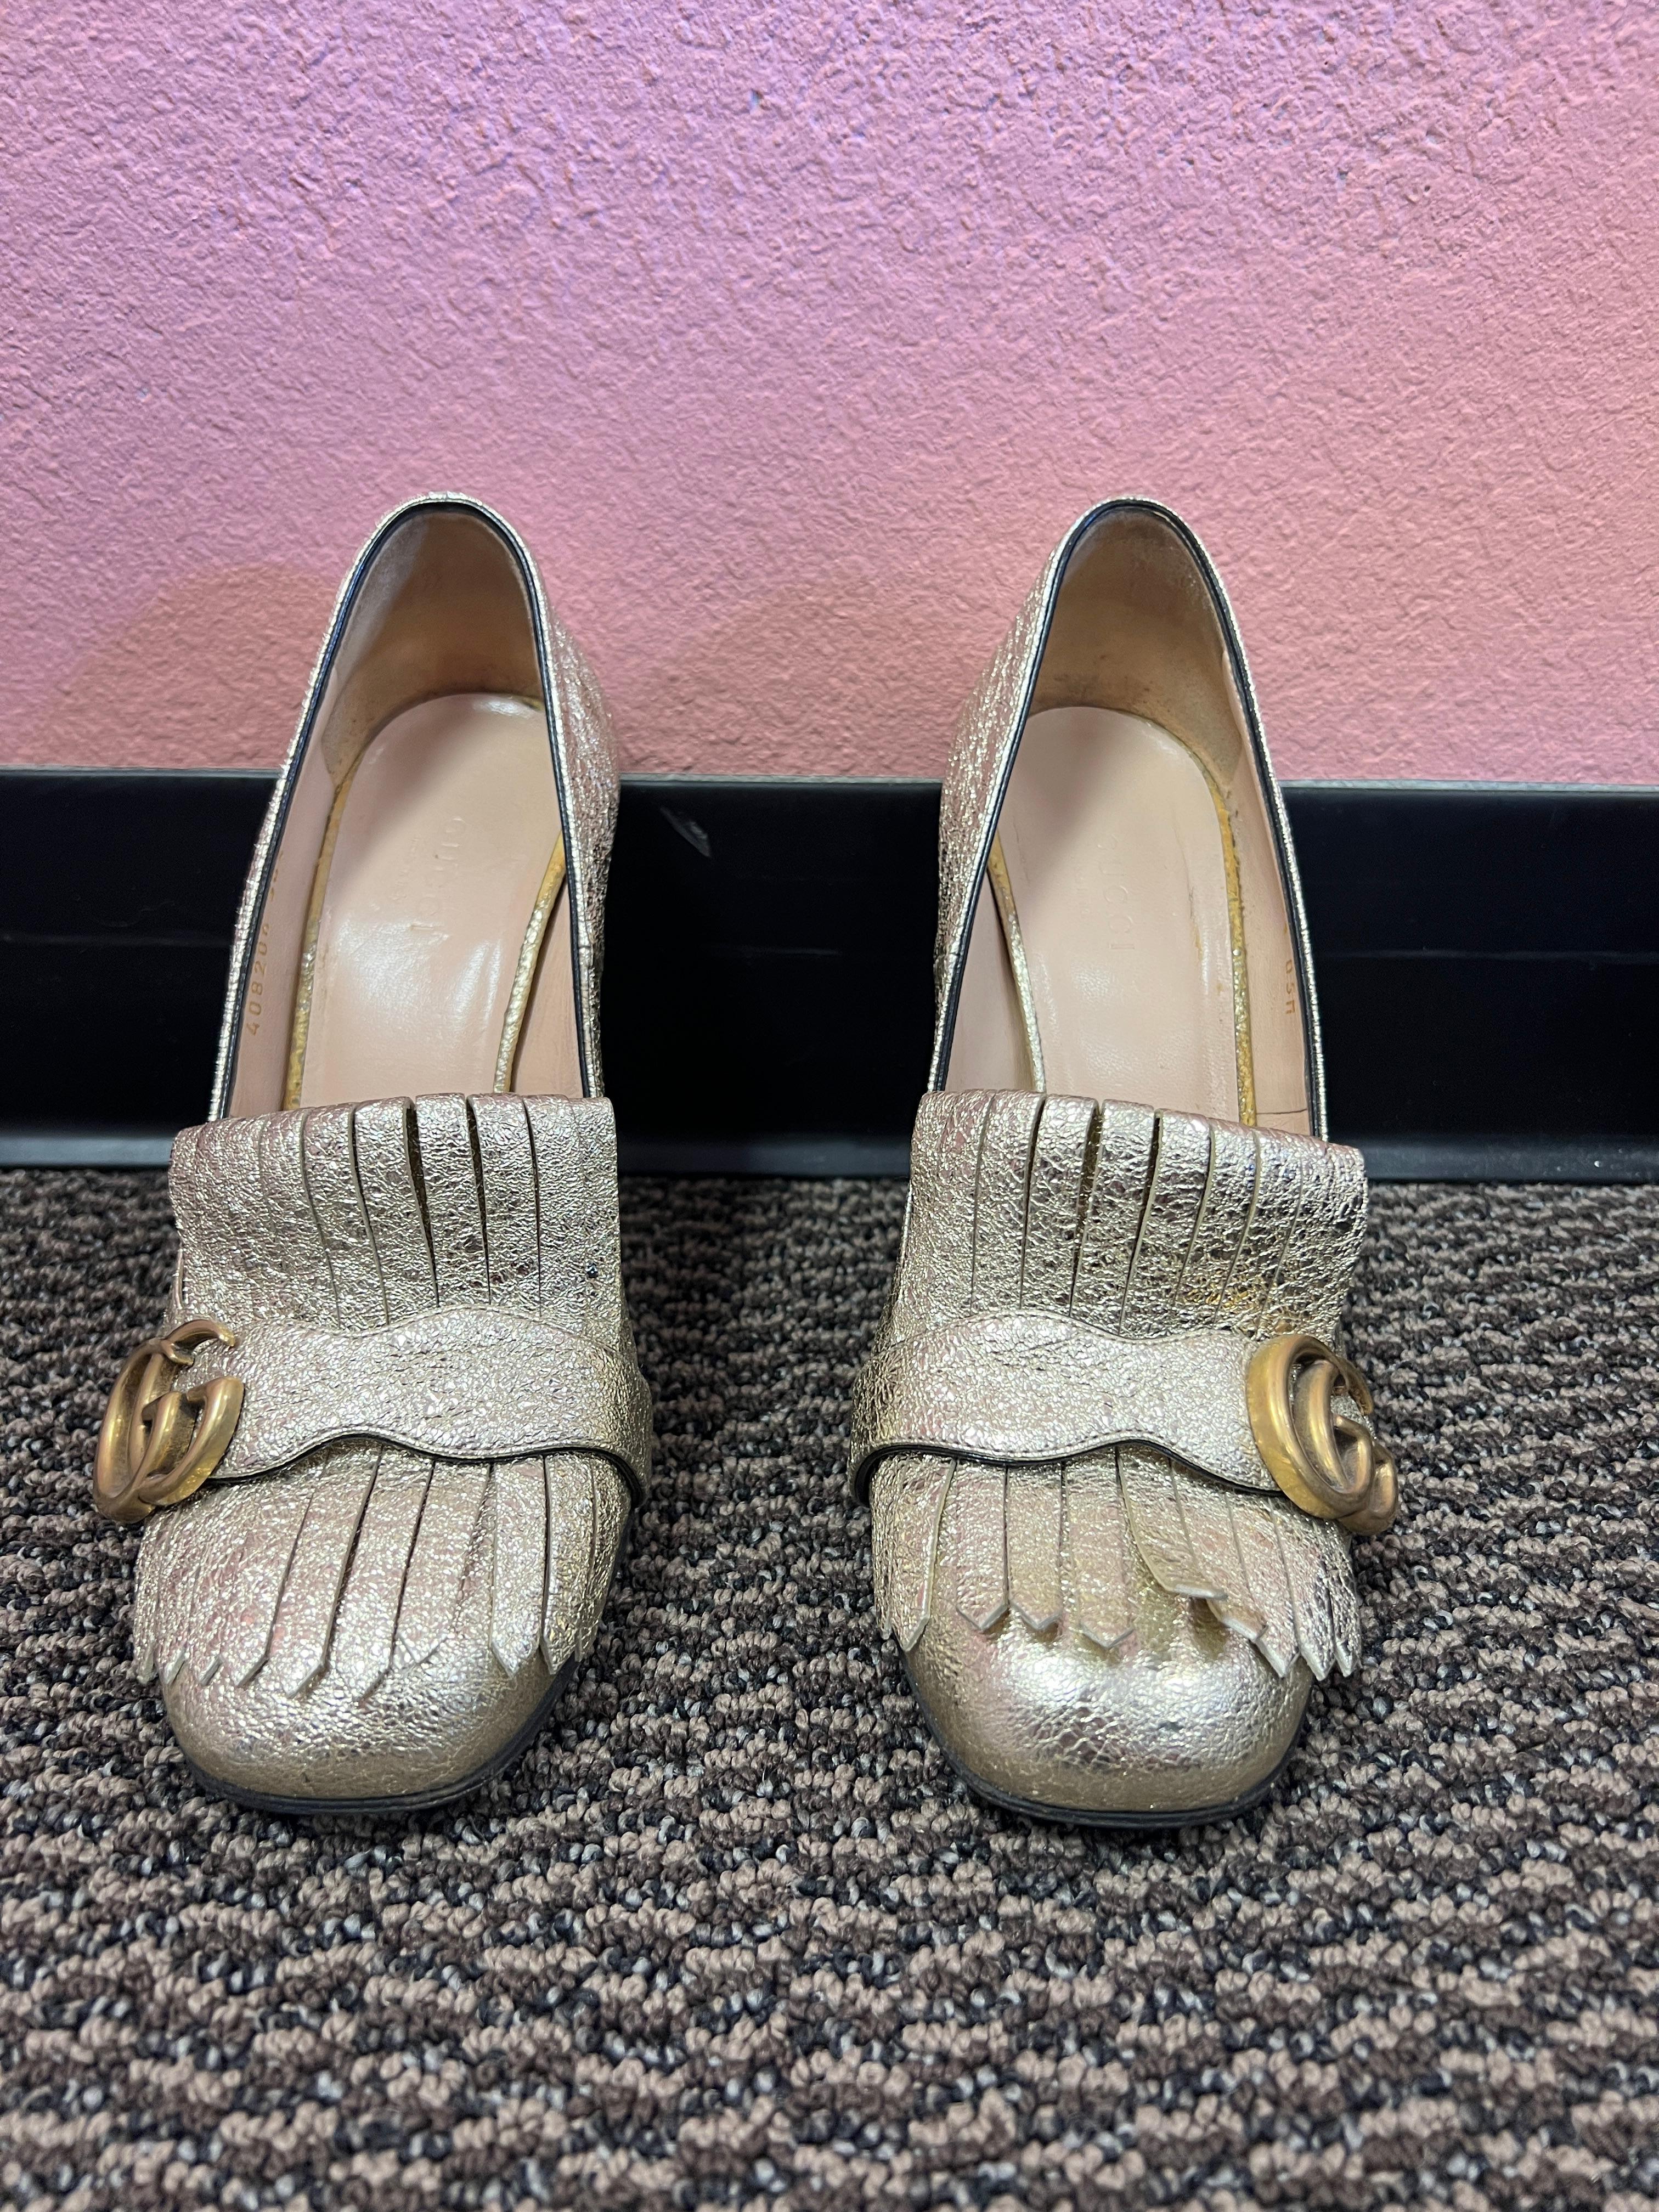 Gucci GG Marmont Goldfoil Maryjanes Size 38  In Excellent Condition For Sale In Thousand Oaks, CA